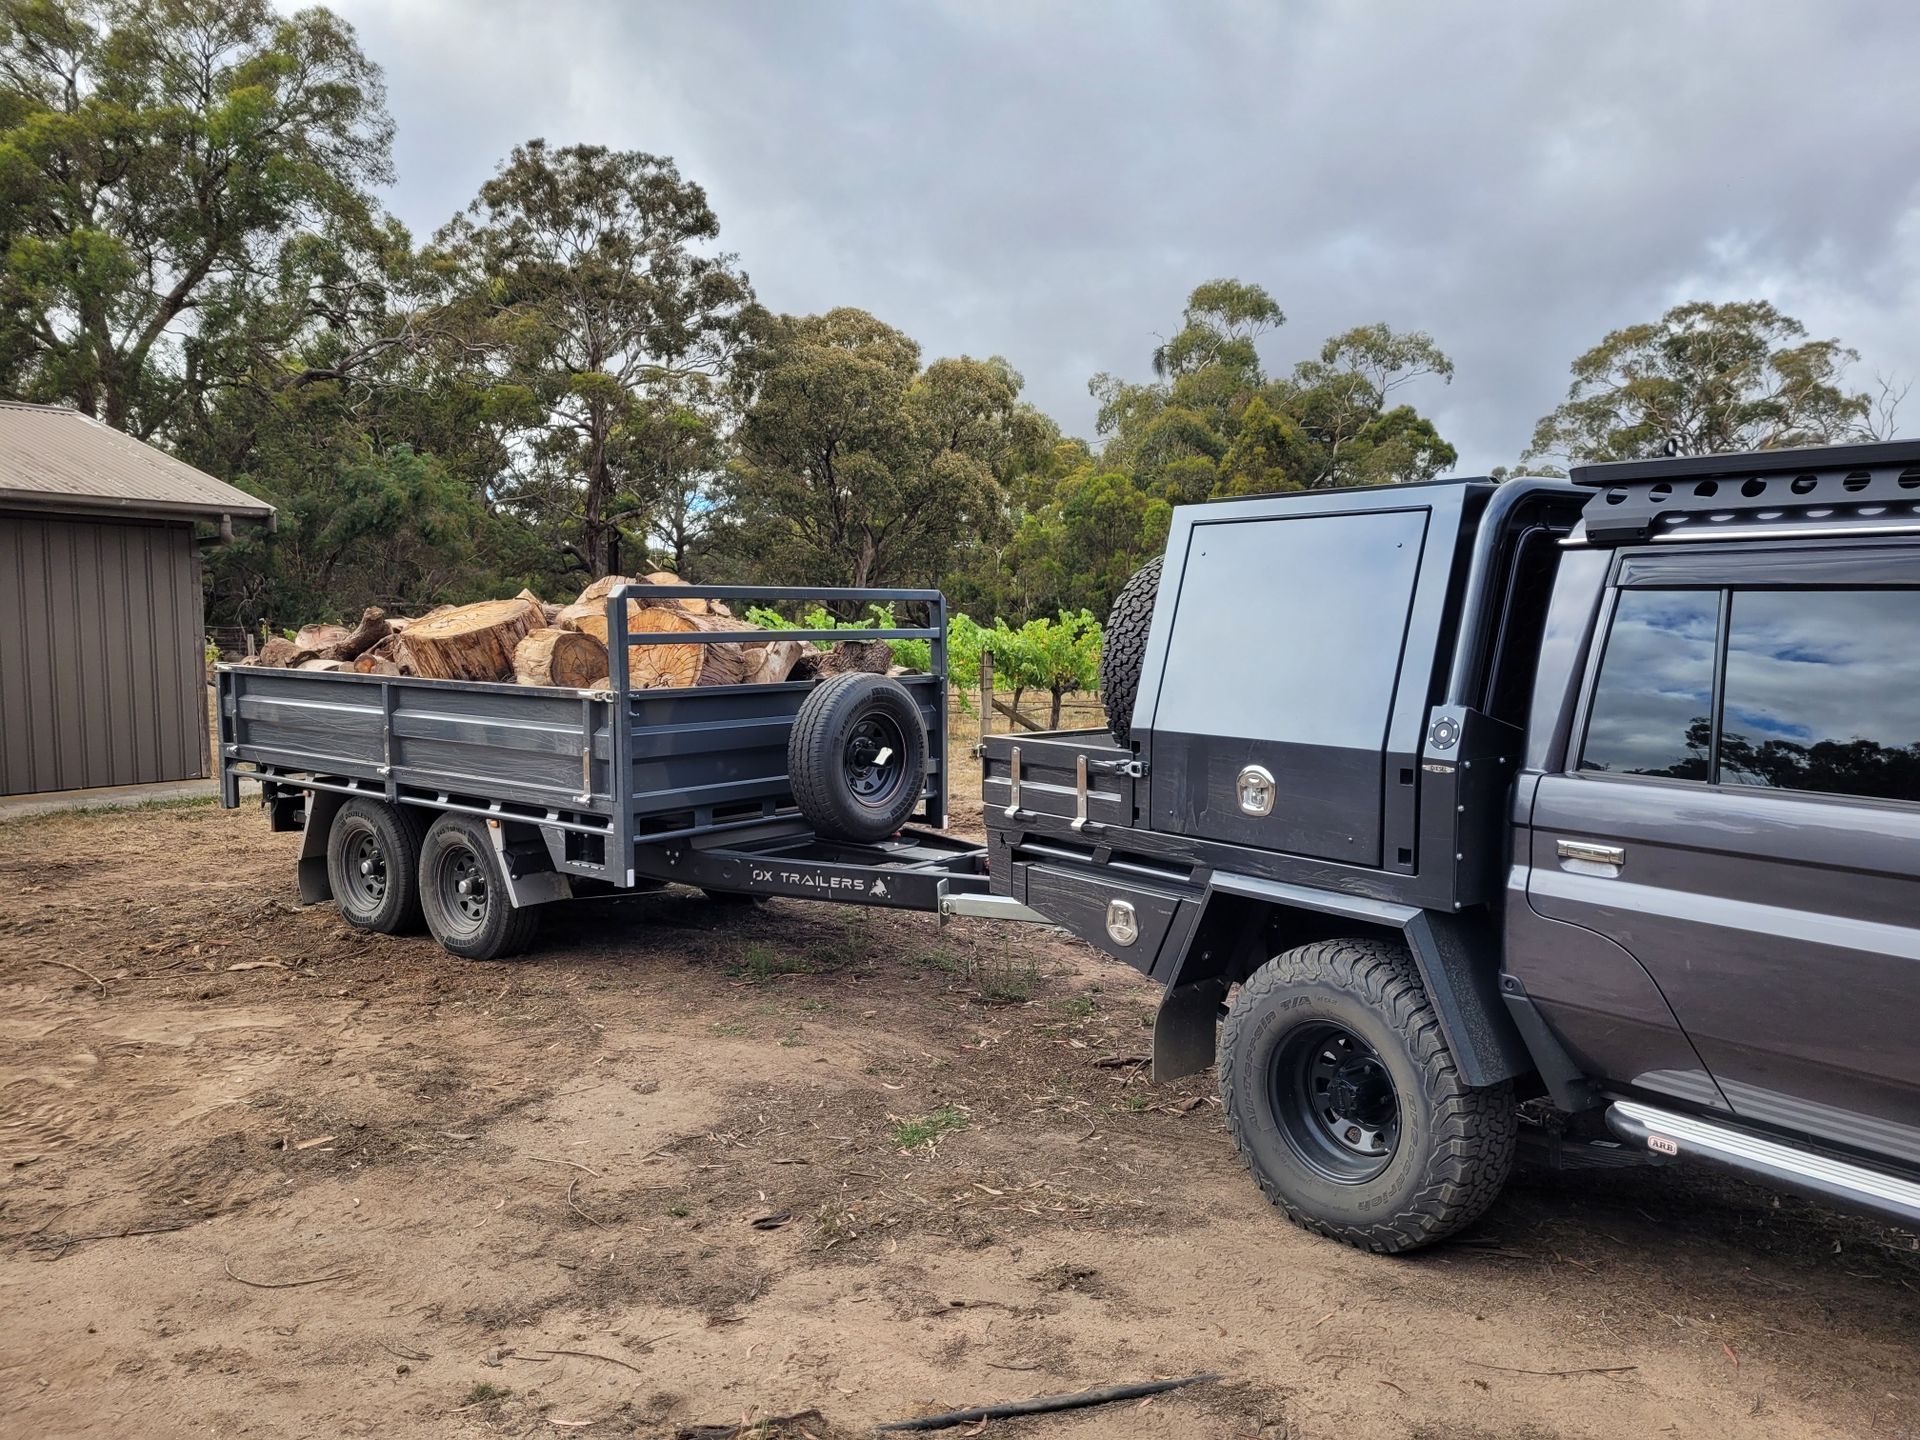 4.2m by 2.1m Tipper Trailer loaded with firewood and towed behind an 80 series Land Cruiser.